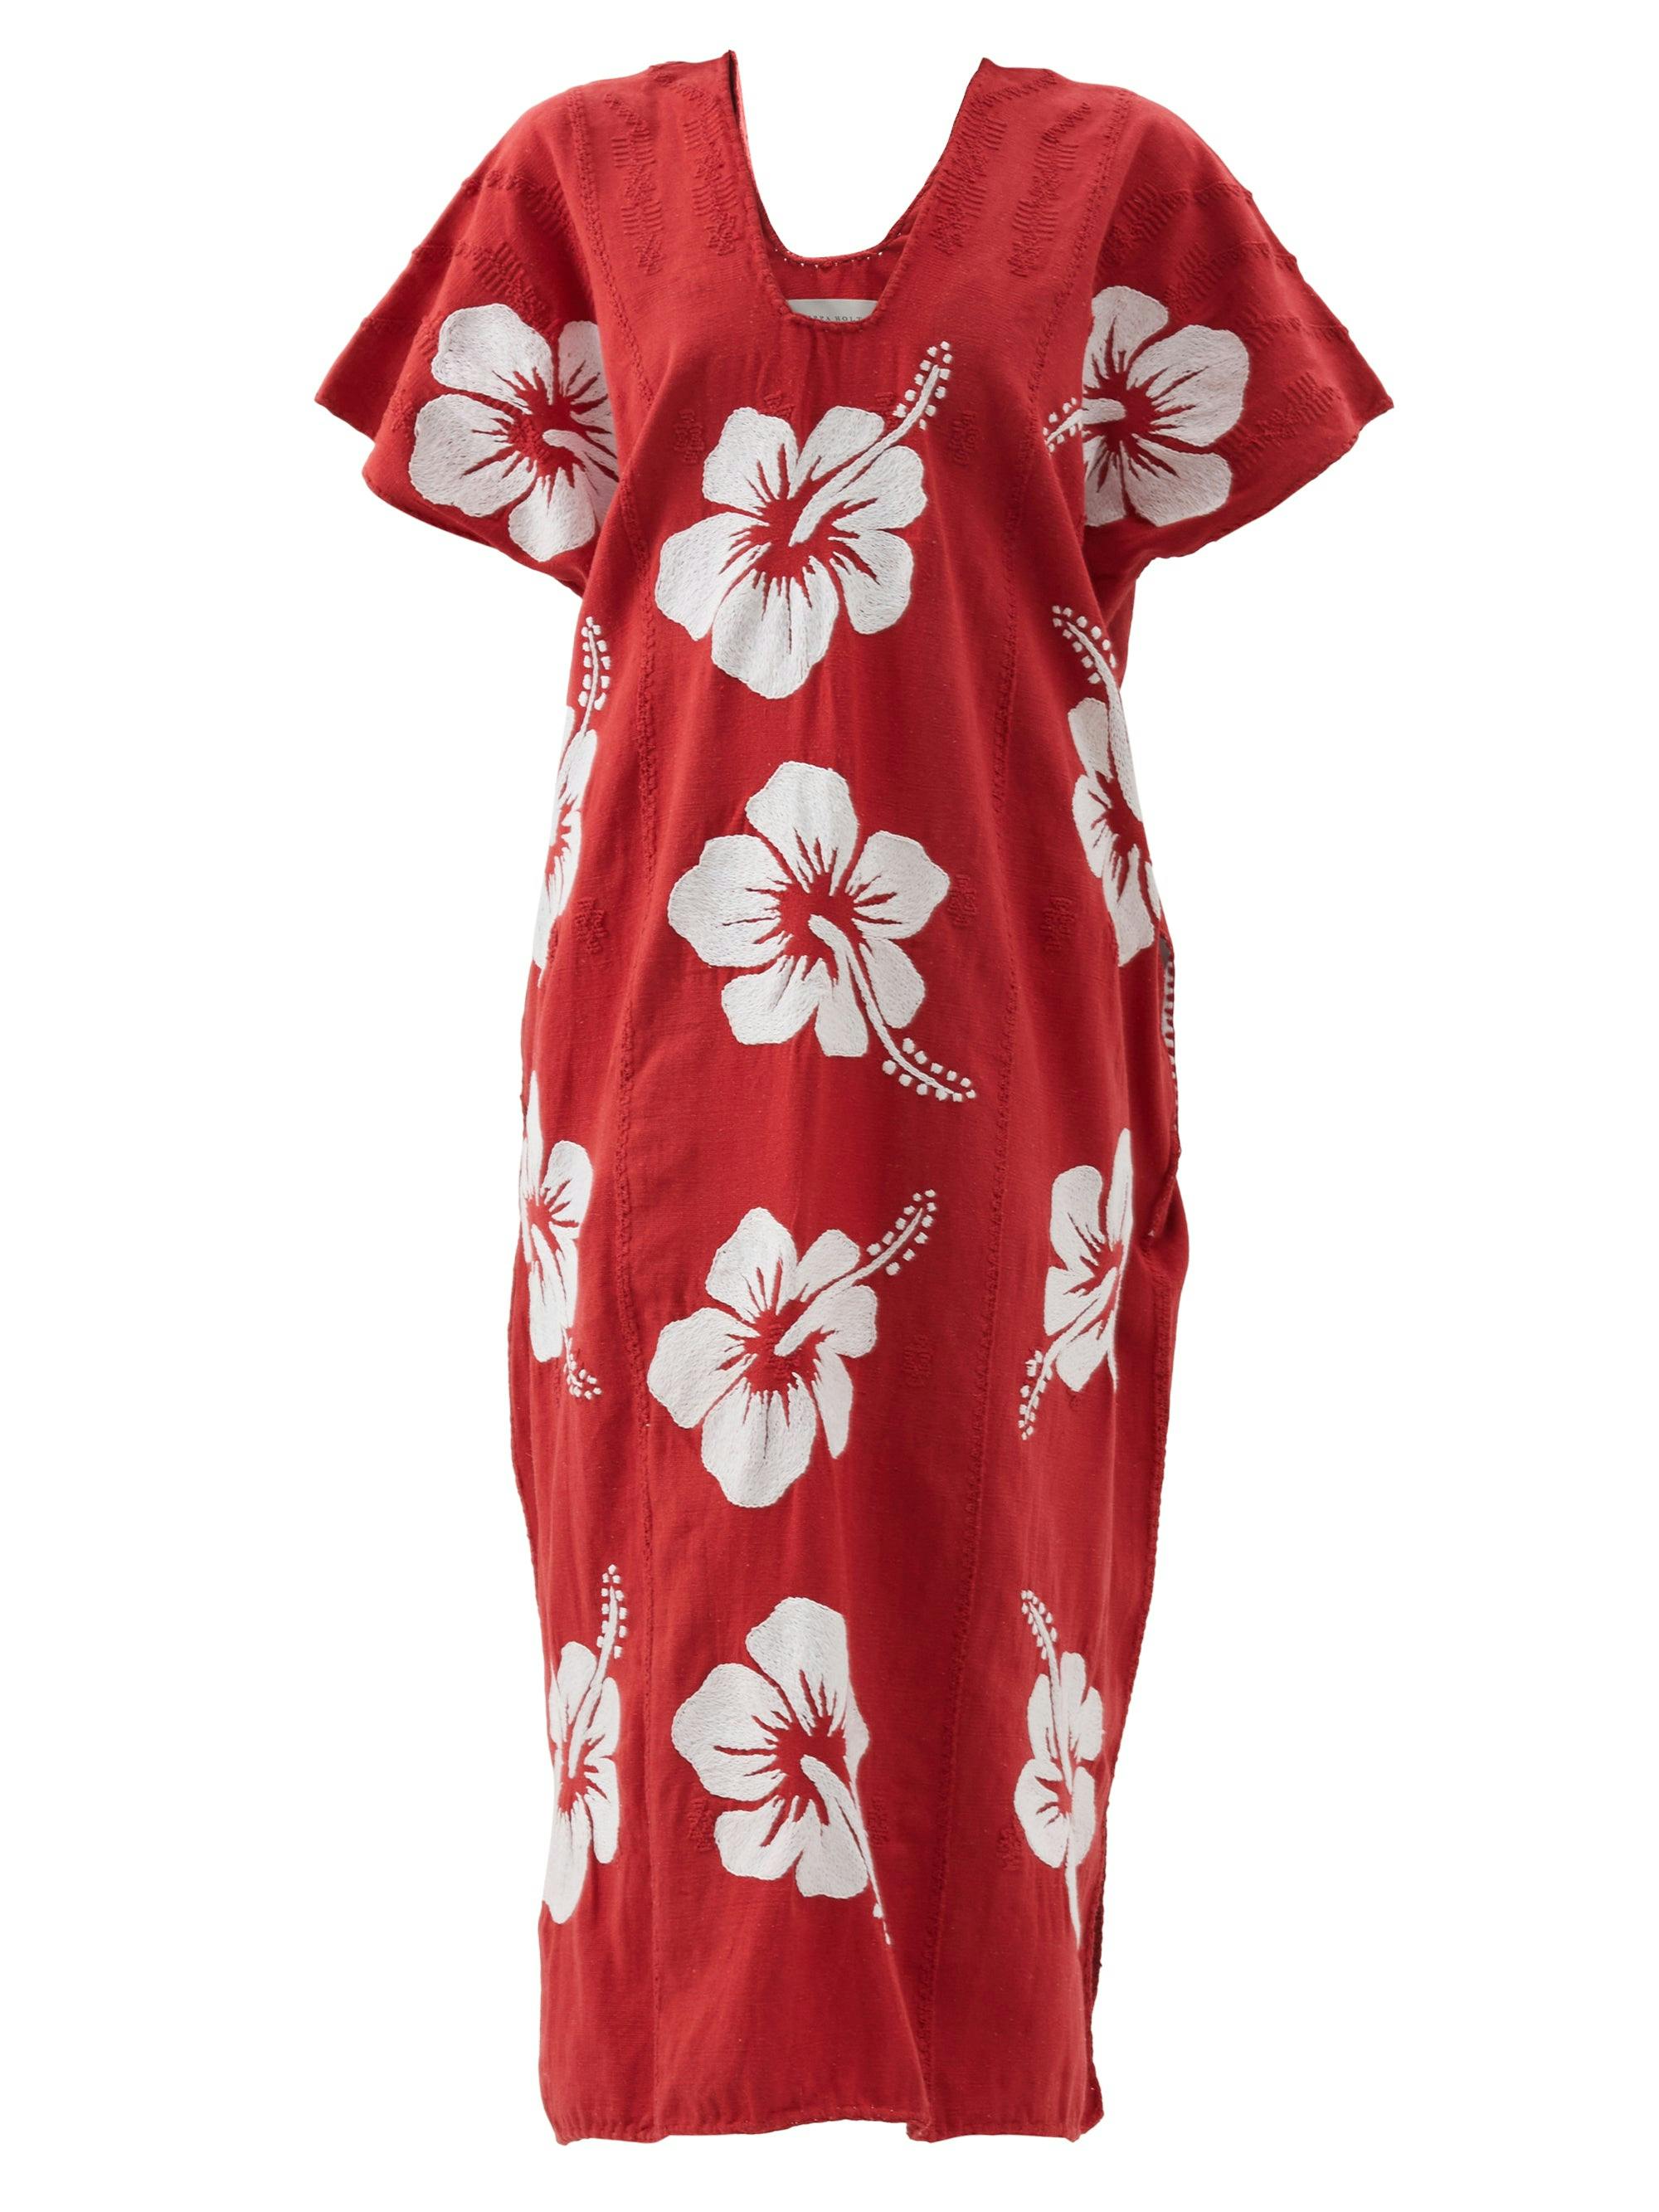 Red and white floral print kaftan